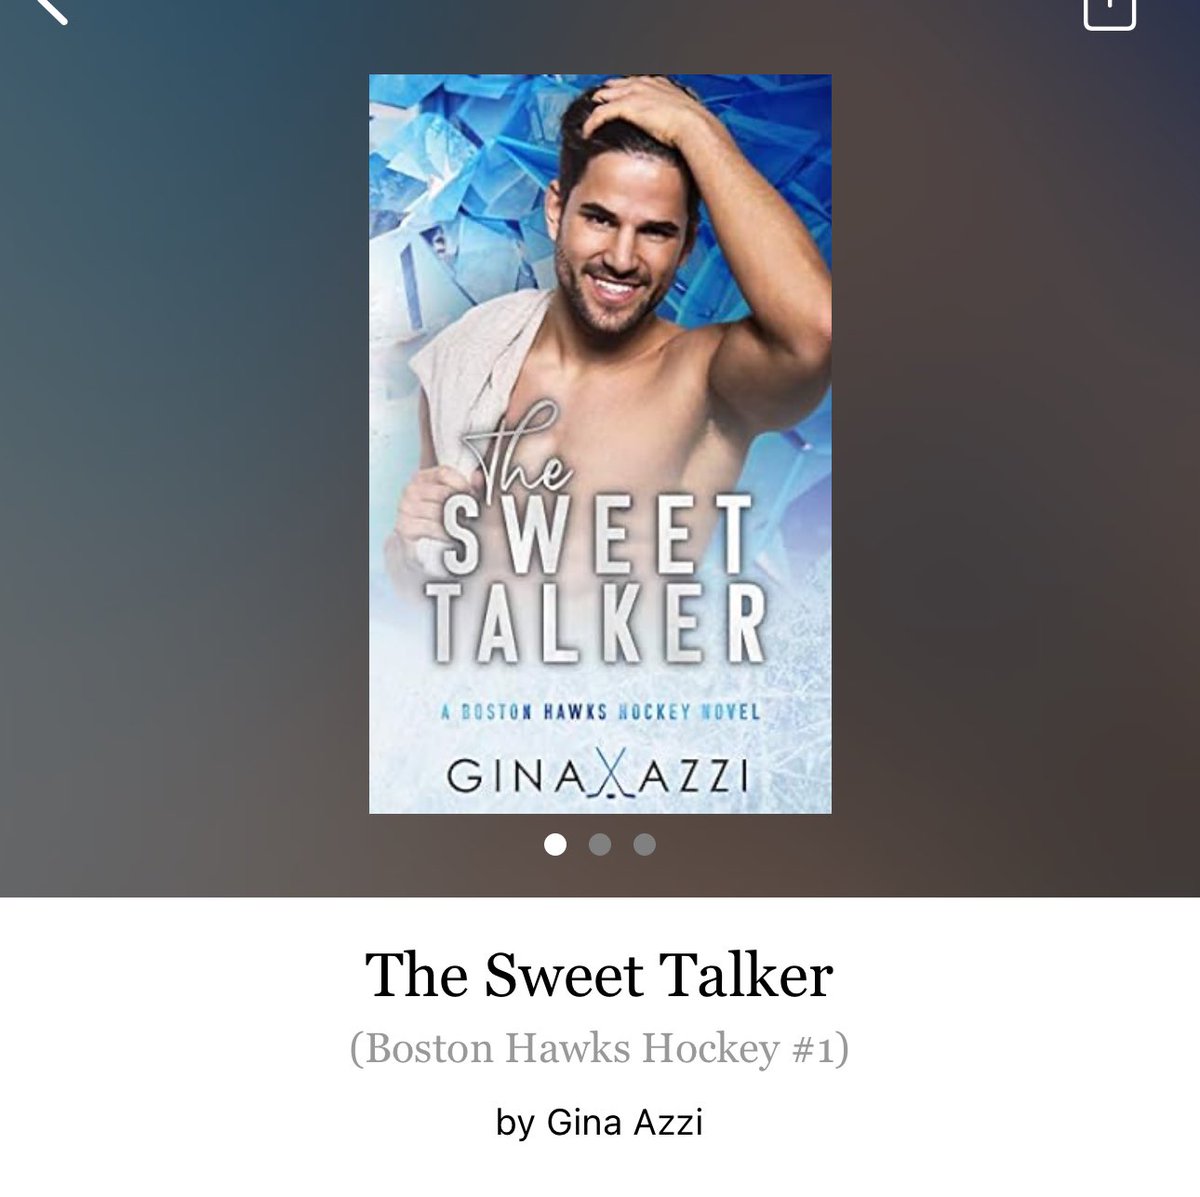 The Sweet Talker by Gina Azzi 

#TheSweetTalker by #GinaAzzi #6270 #30chapters #228pages #419of400 #Seris #Audiobook #56for14 #Hoopla #BostonHawksHockeySeries #7horuaudiobook #Book1of9 #NoahAndIndy #april2024 #clearingoffreadingshelves #whatsnext #readitquick